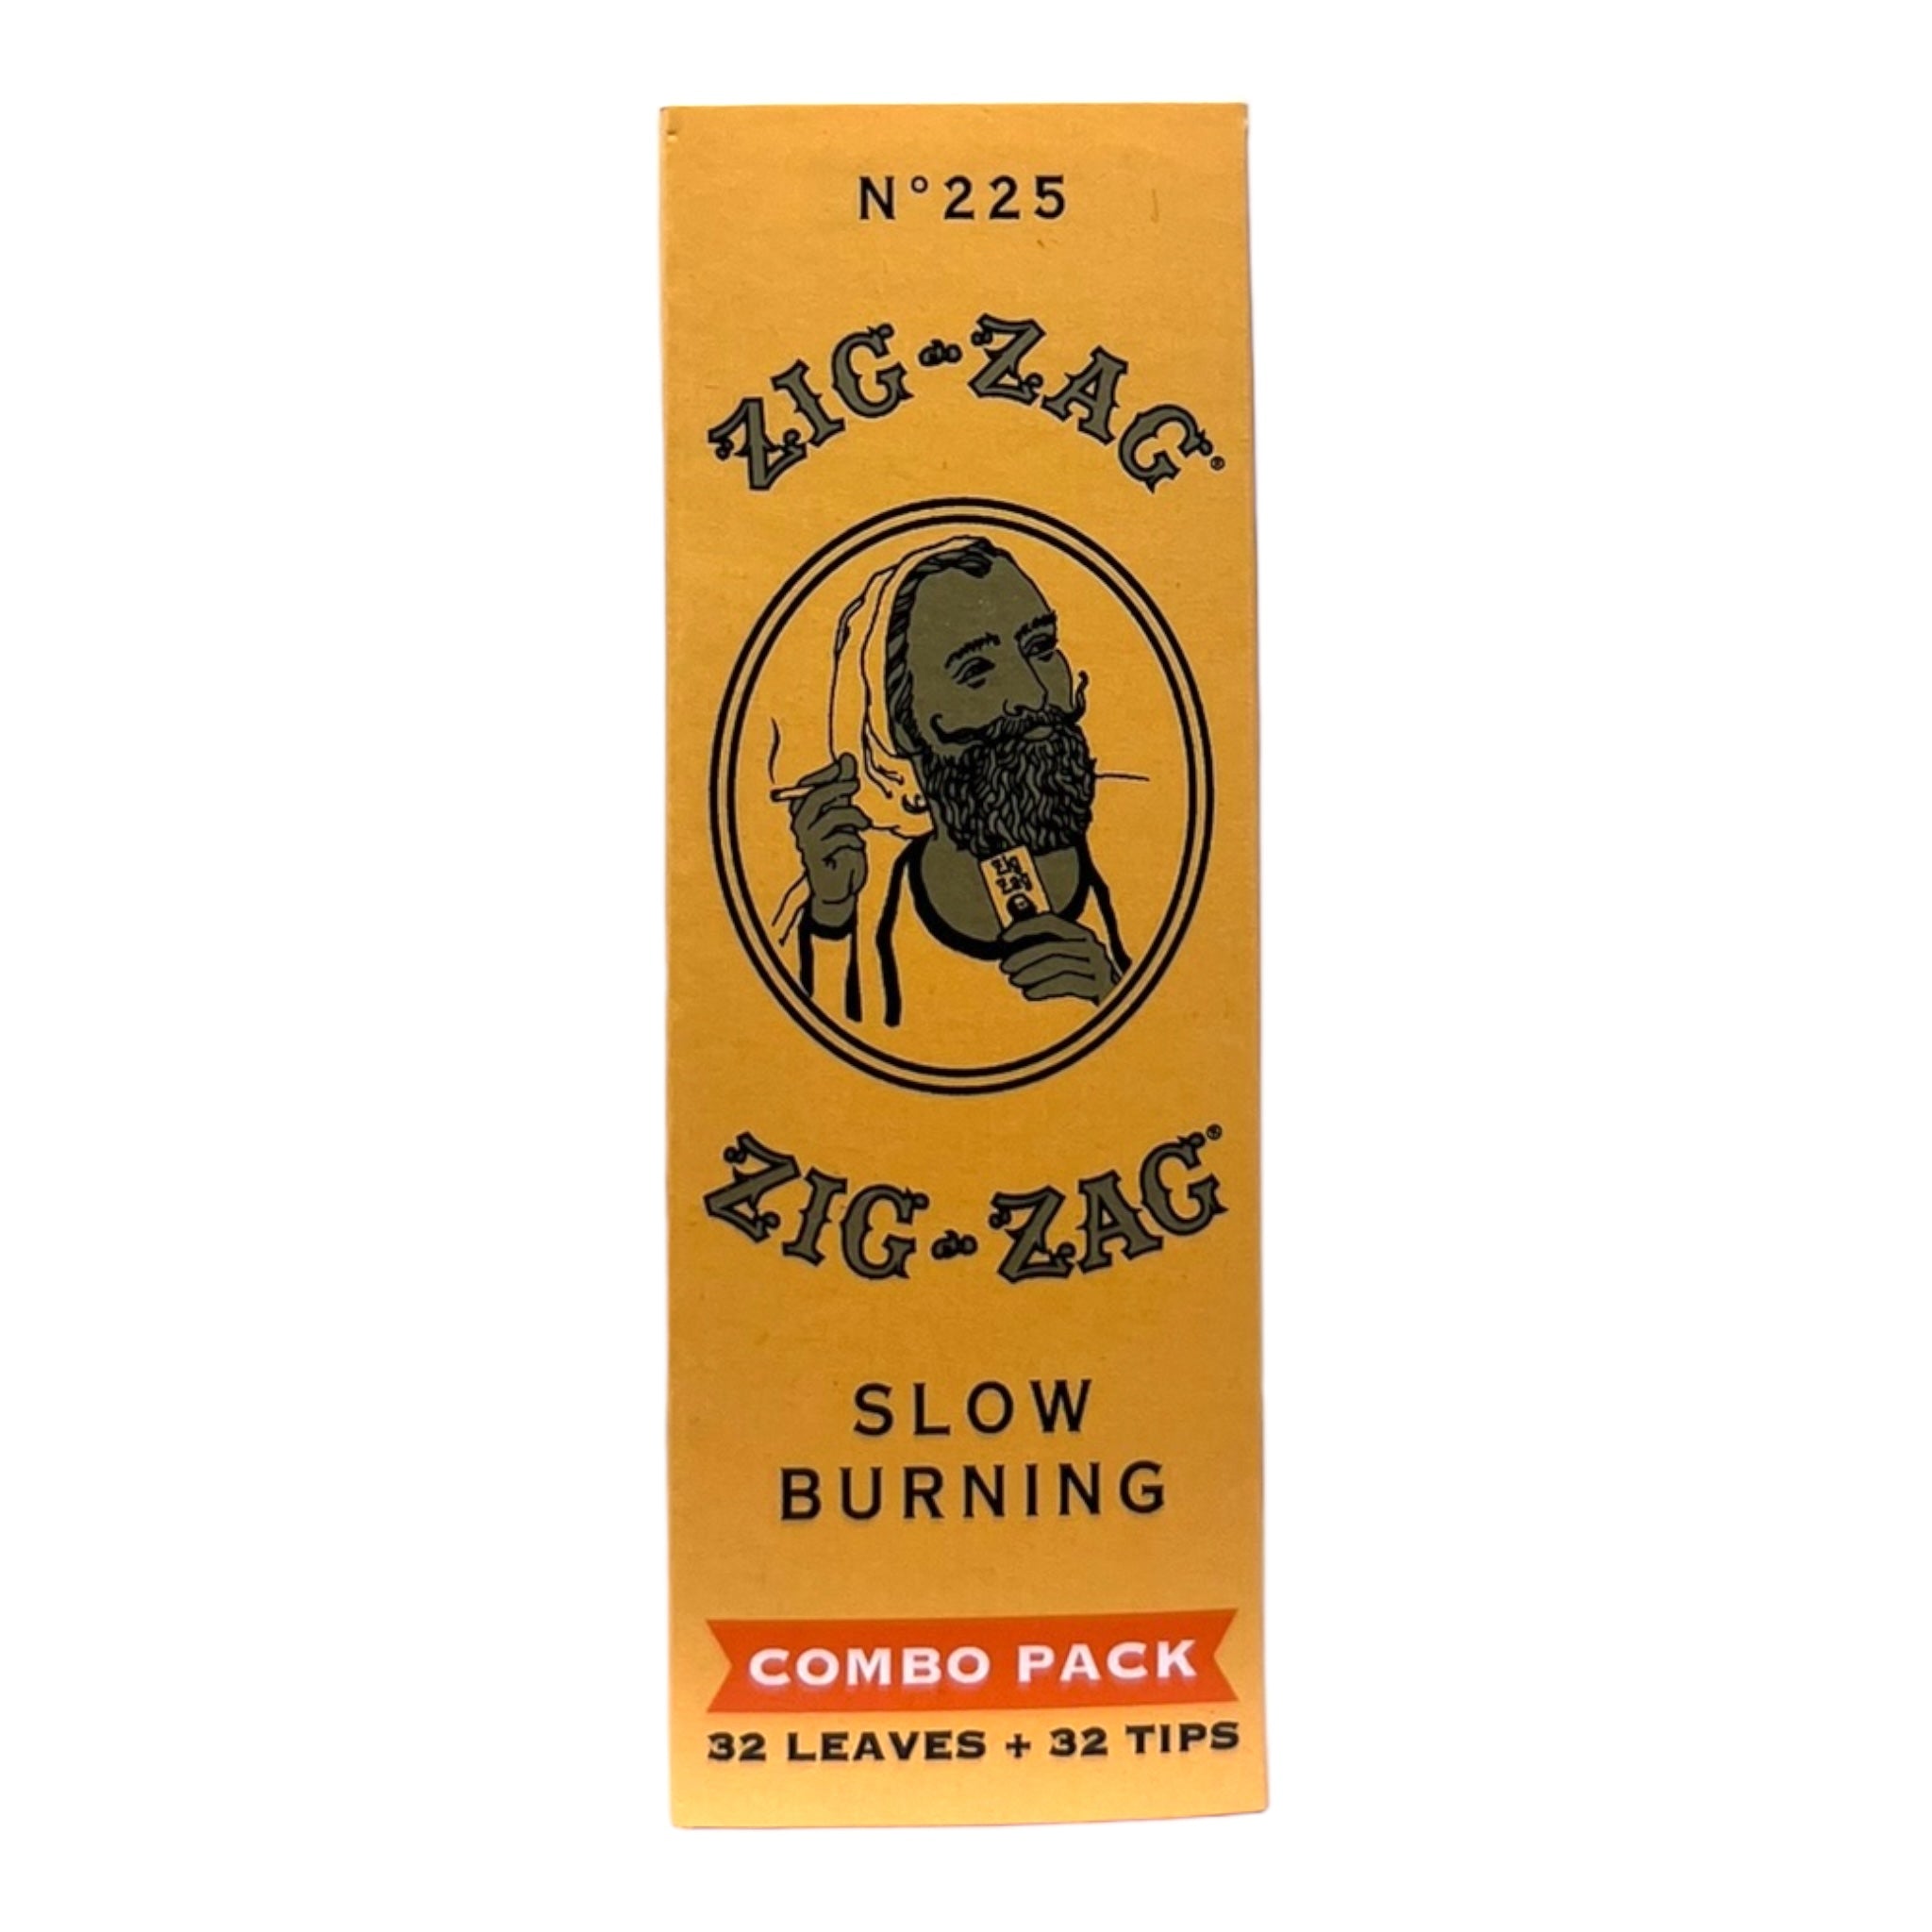 Zig-Zag Rolling Papers